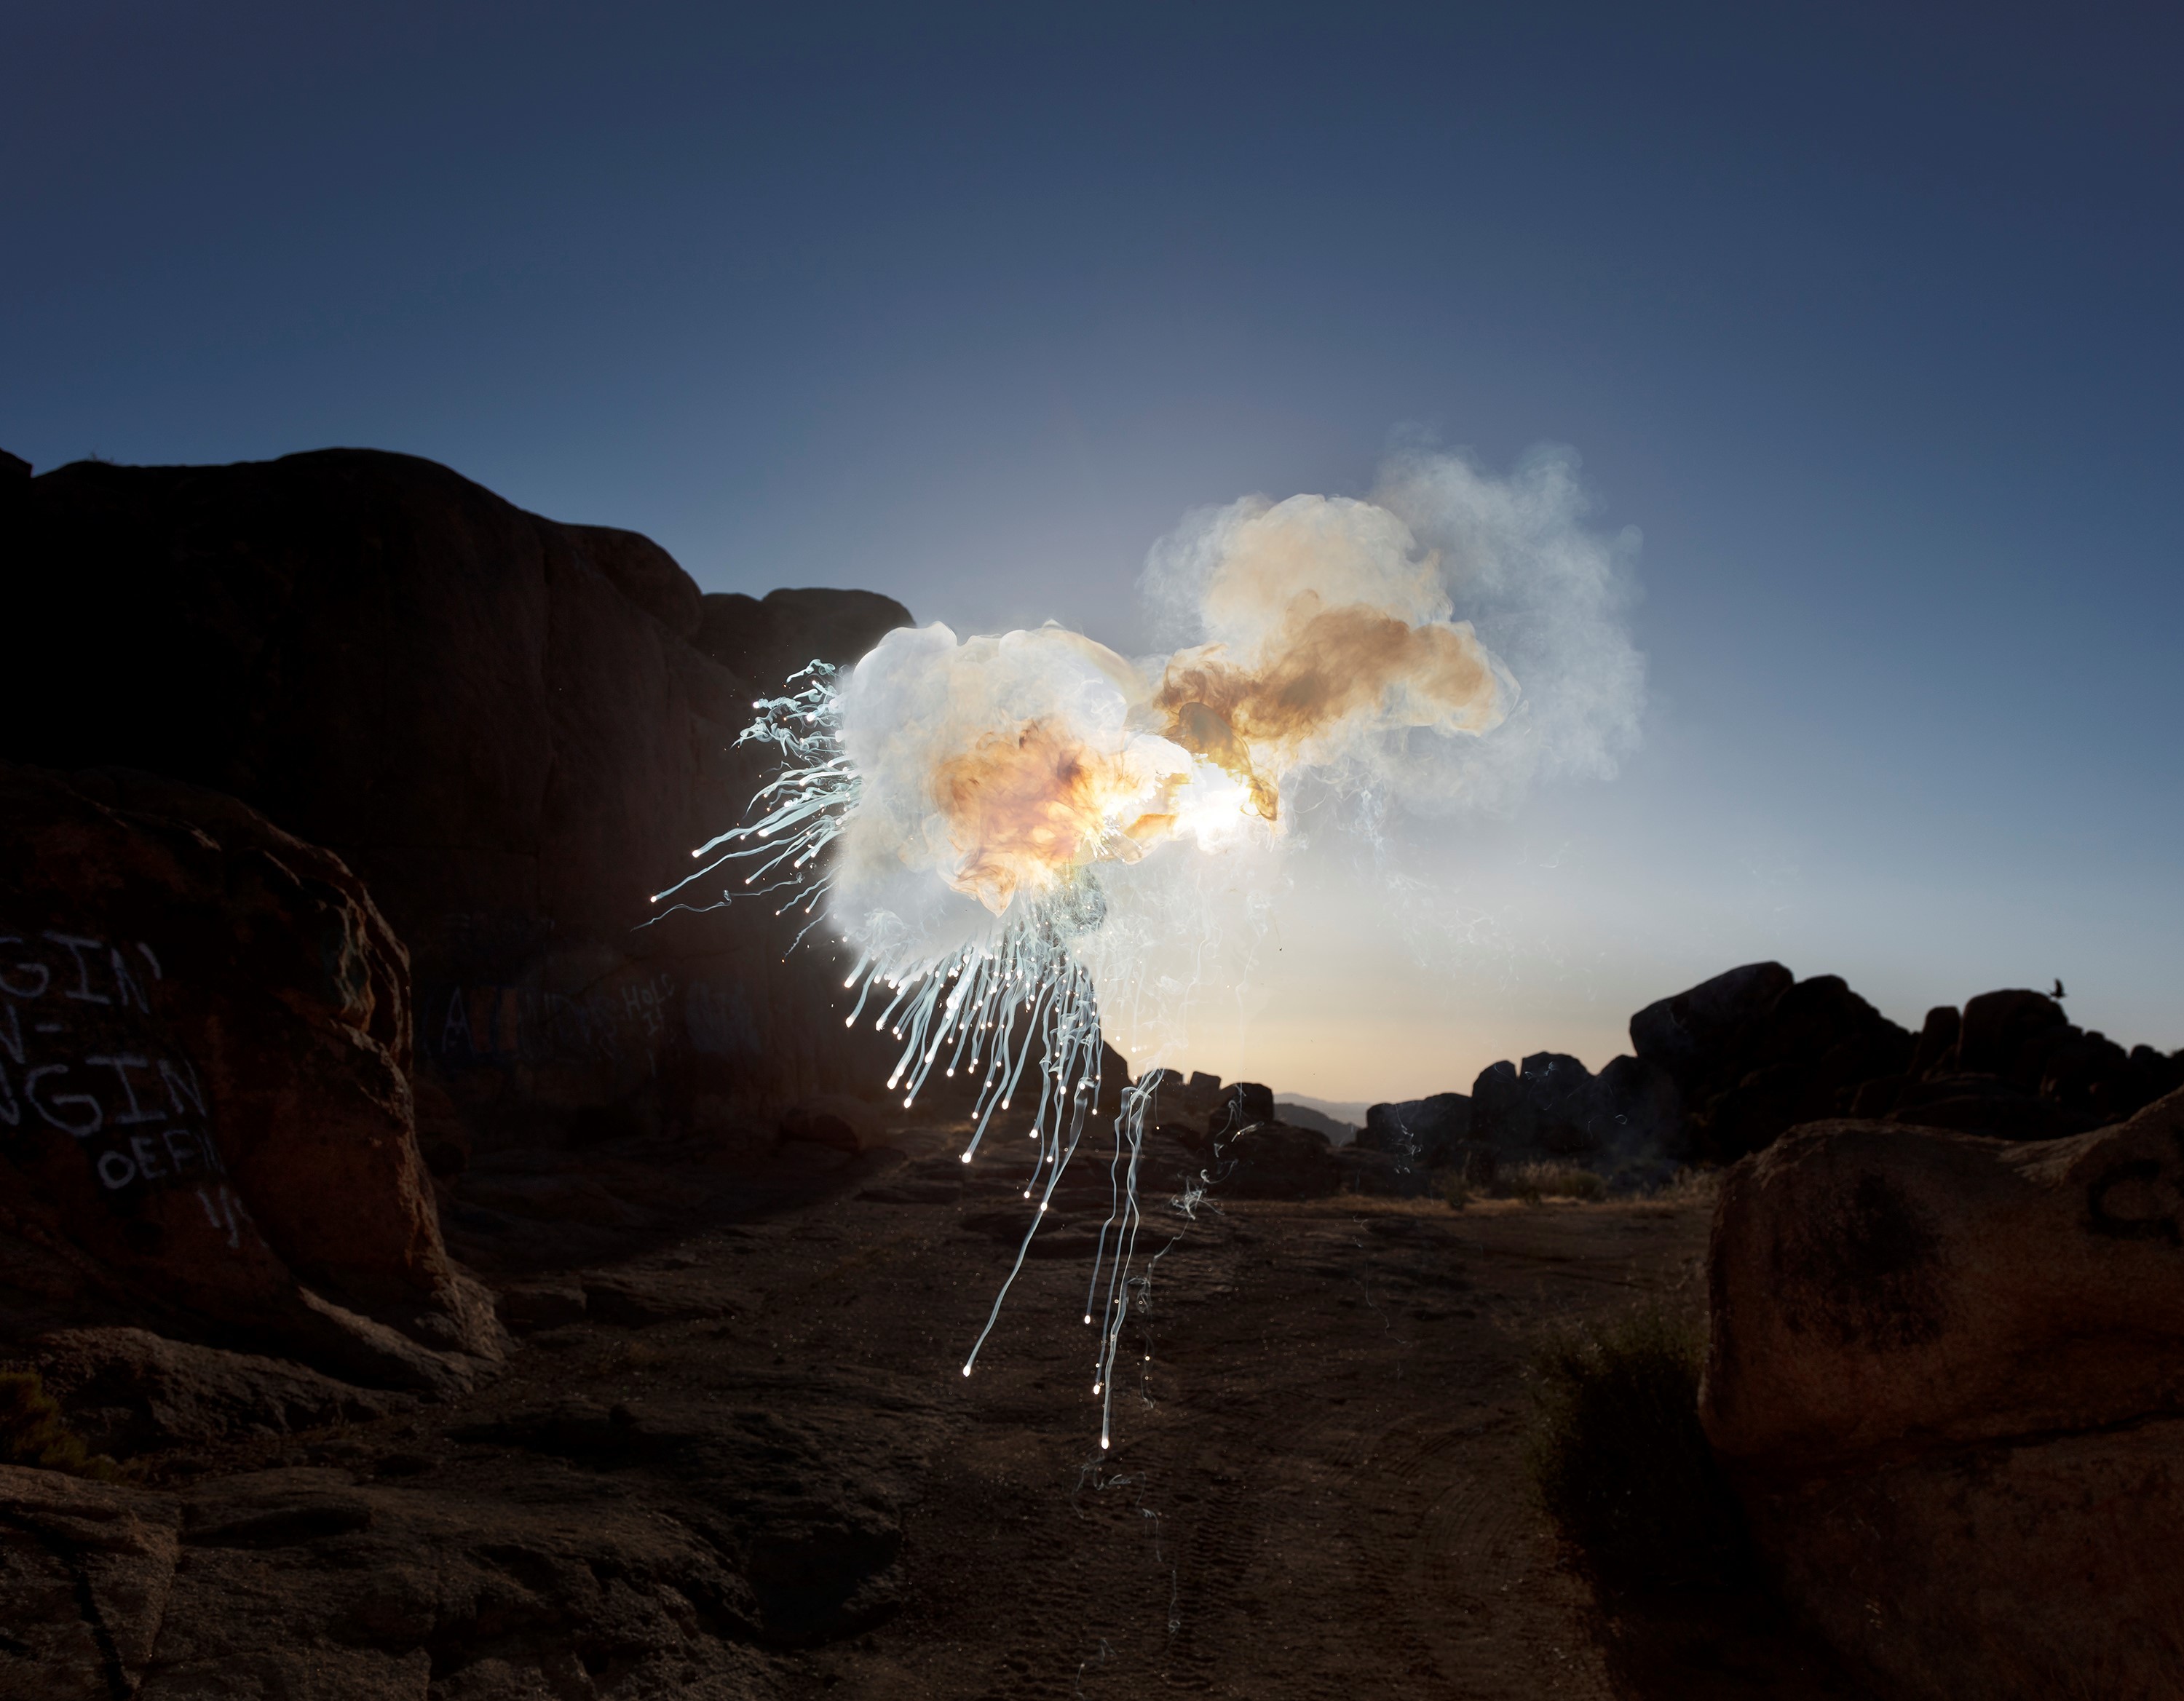 Artist captures controlled explosions in photography - Connect Savannah.com